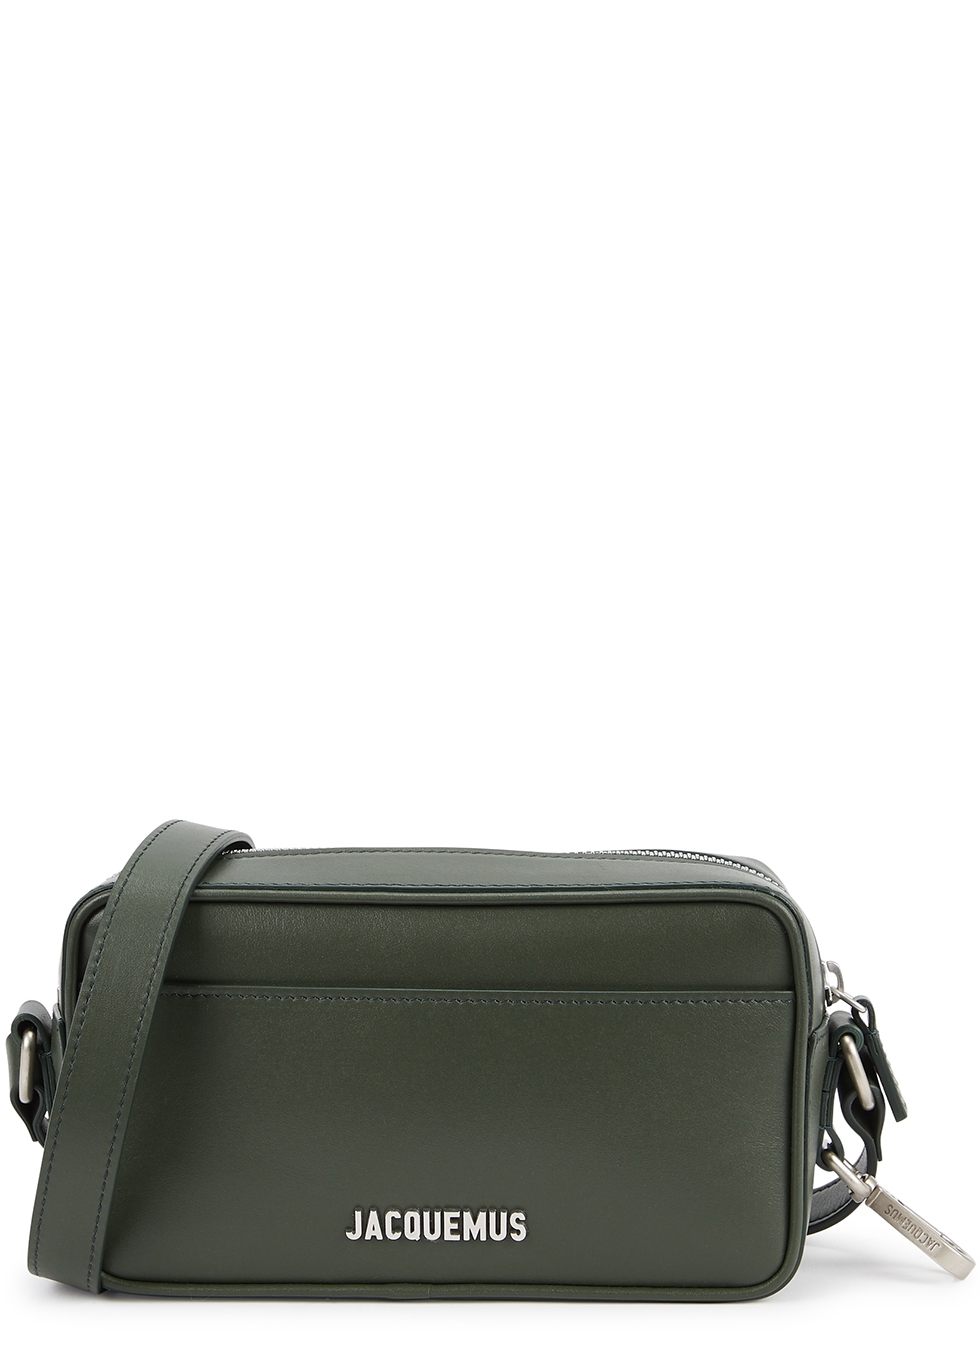 Womens Bags Crossbody bags and purses Jacquemus Le Baneto Leather Cross-body Bag in Dark Green Green 